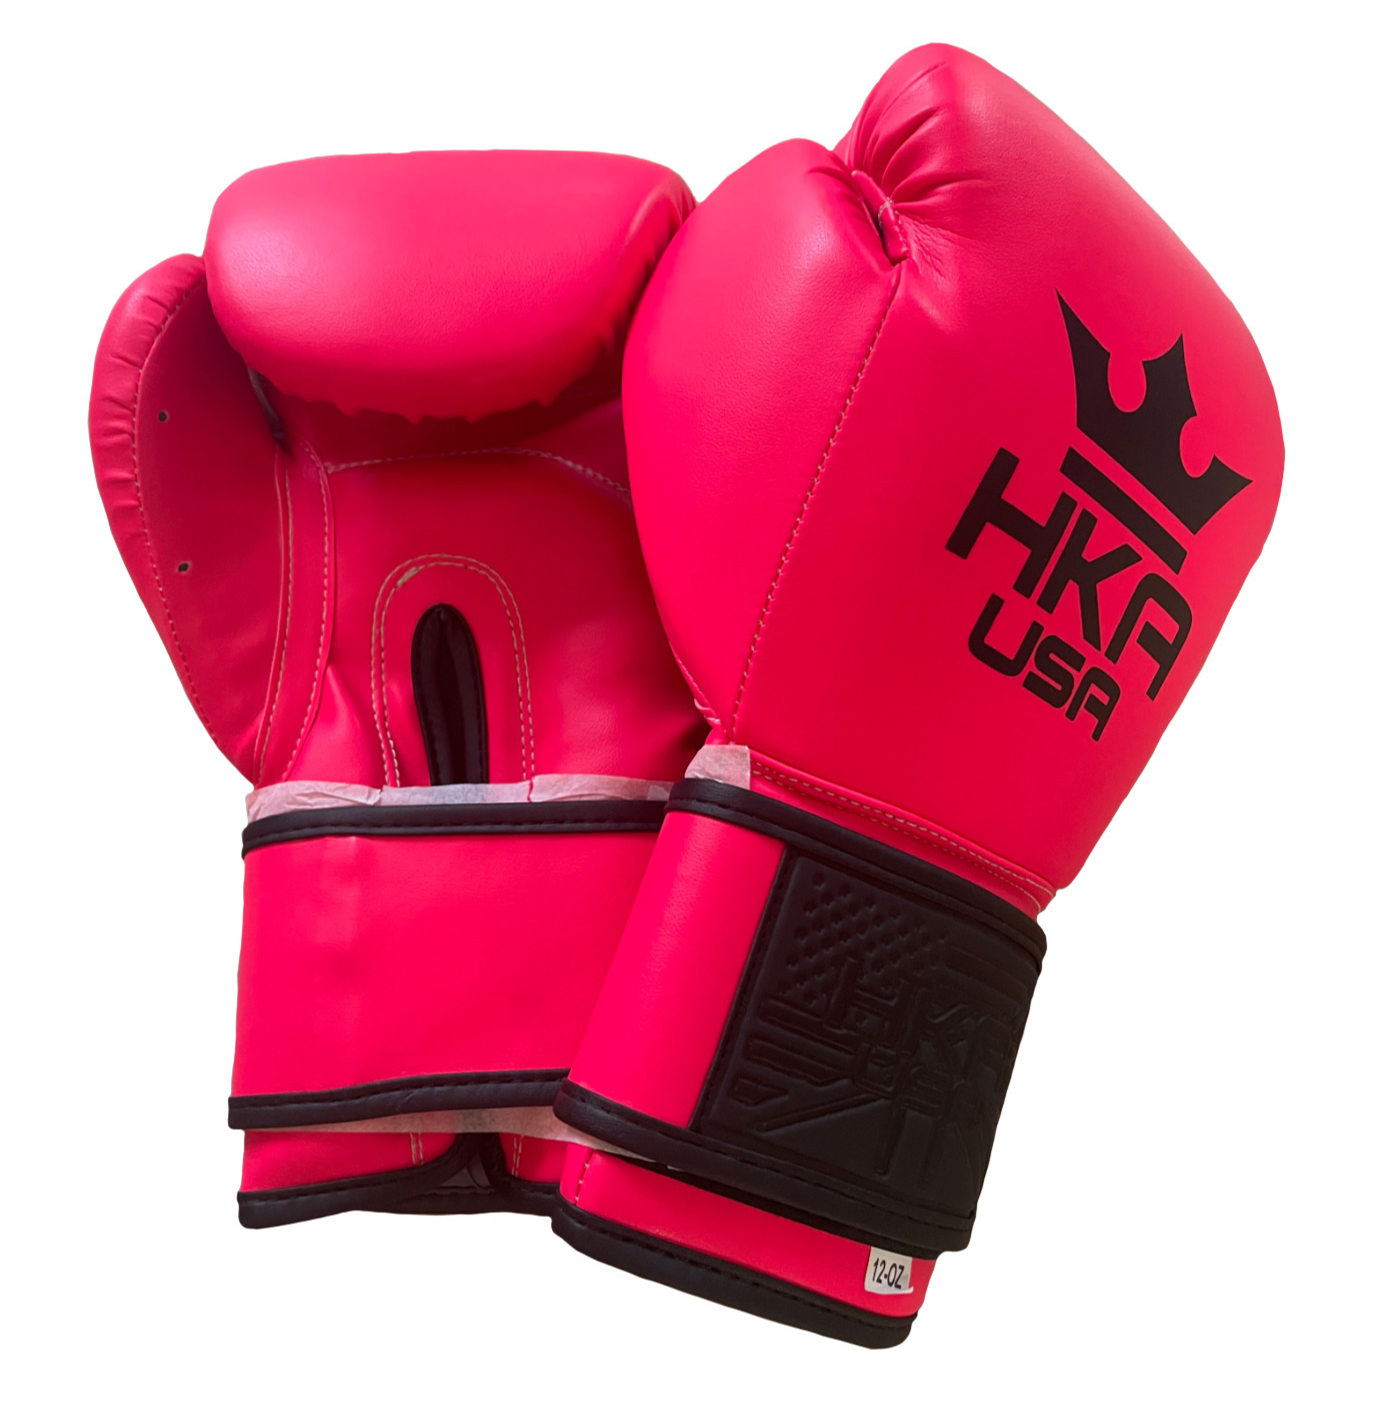 Neon Boxing Gloves - PINK